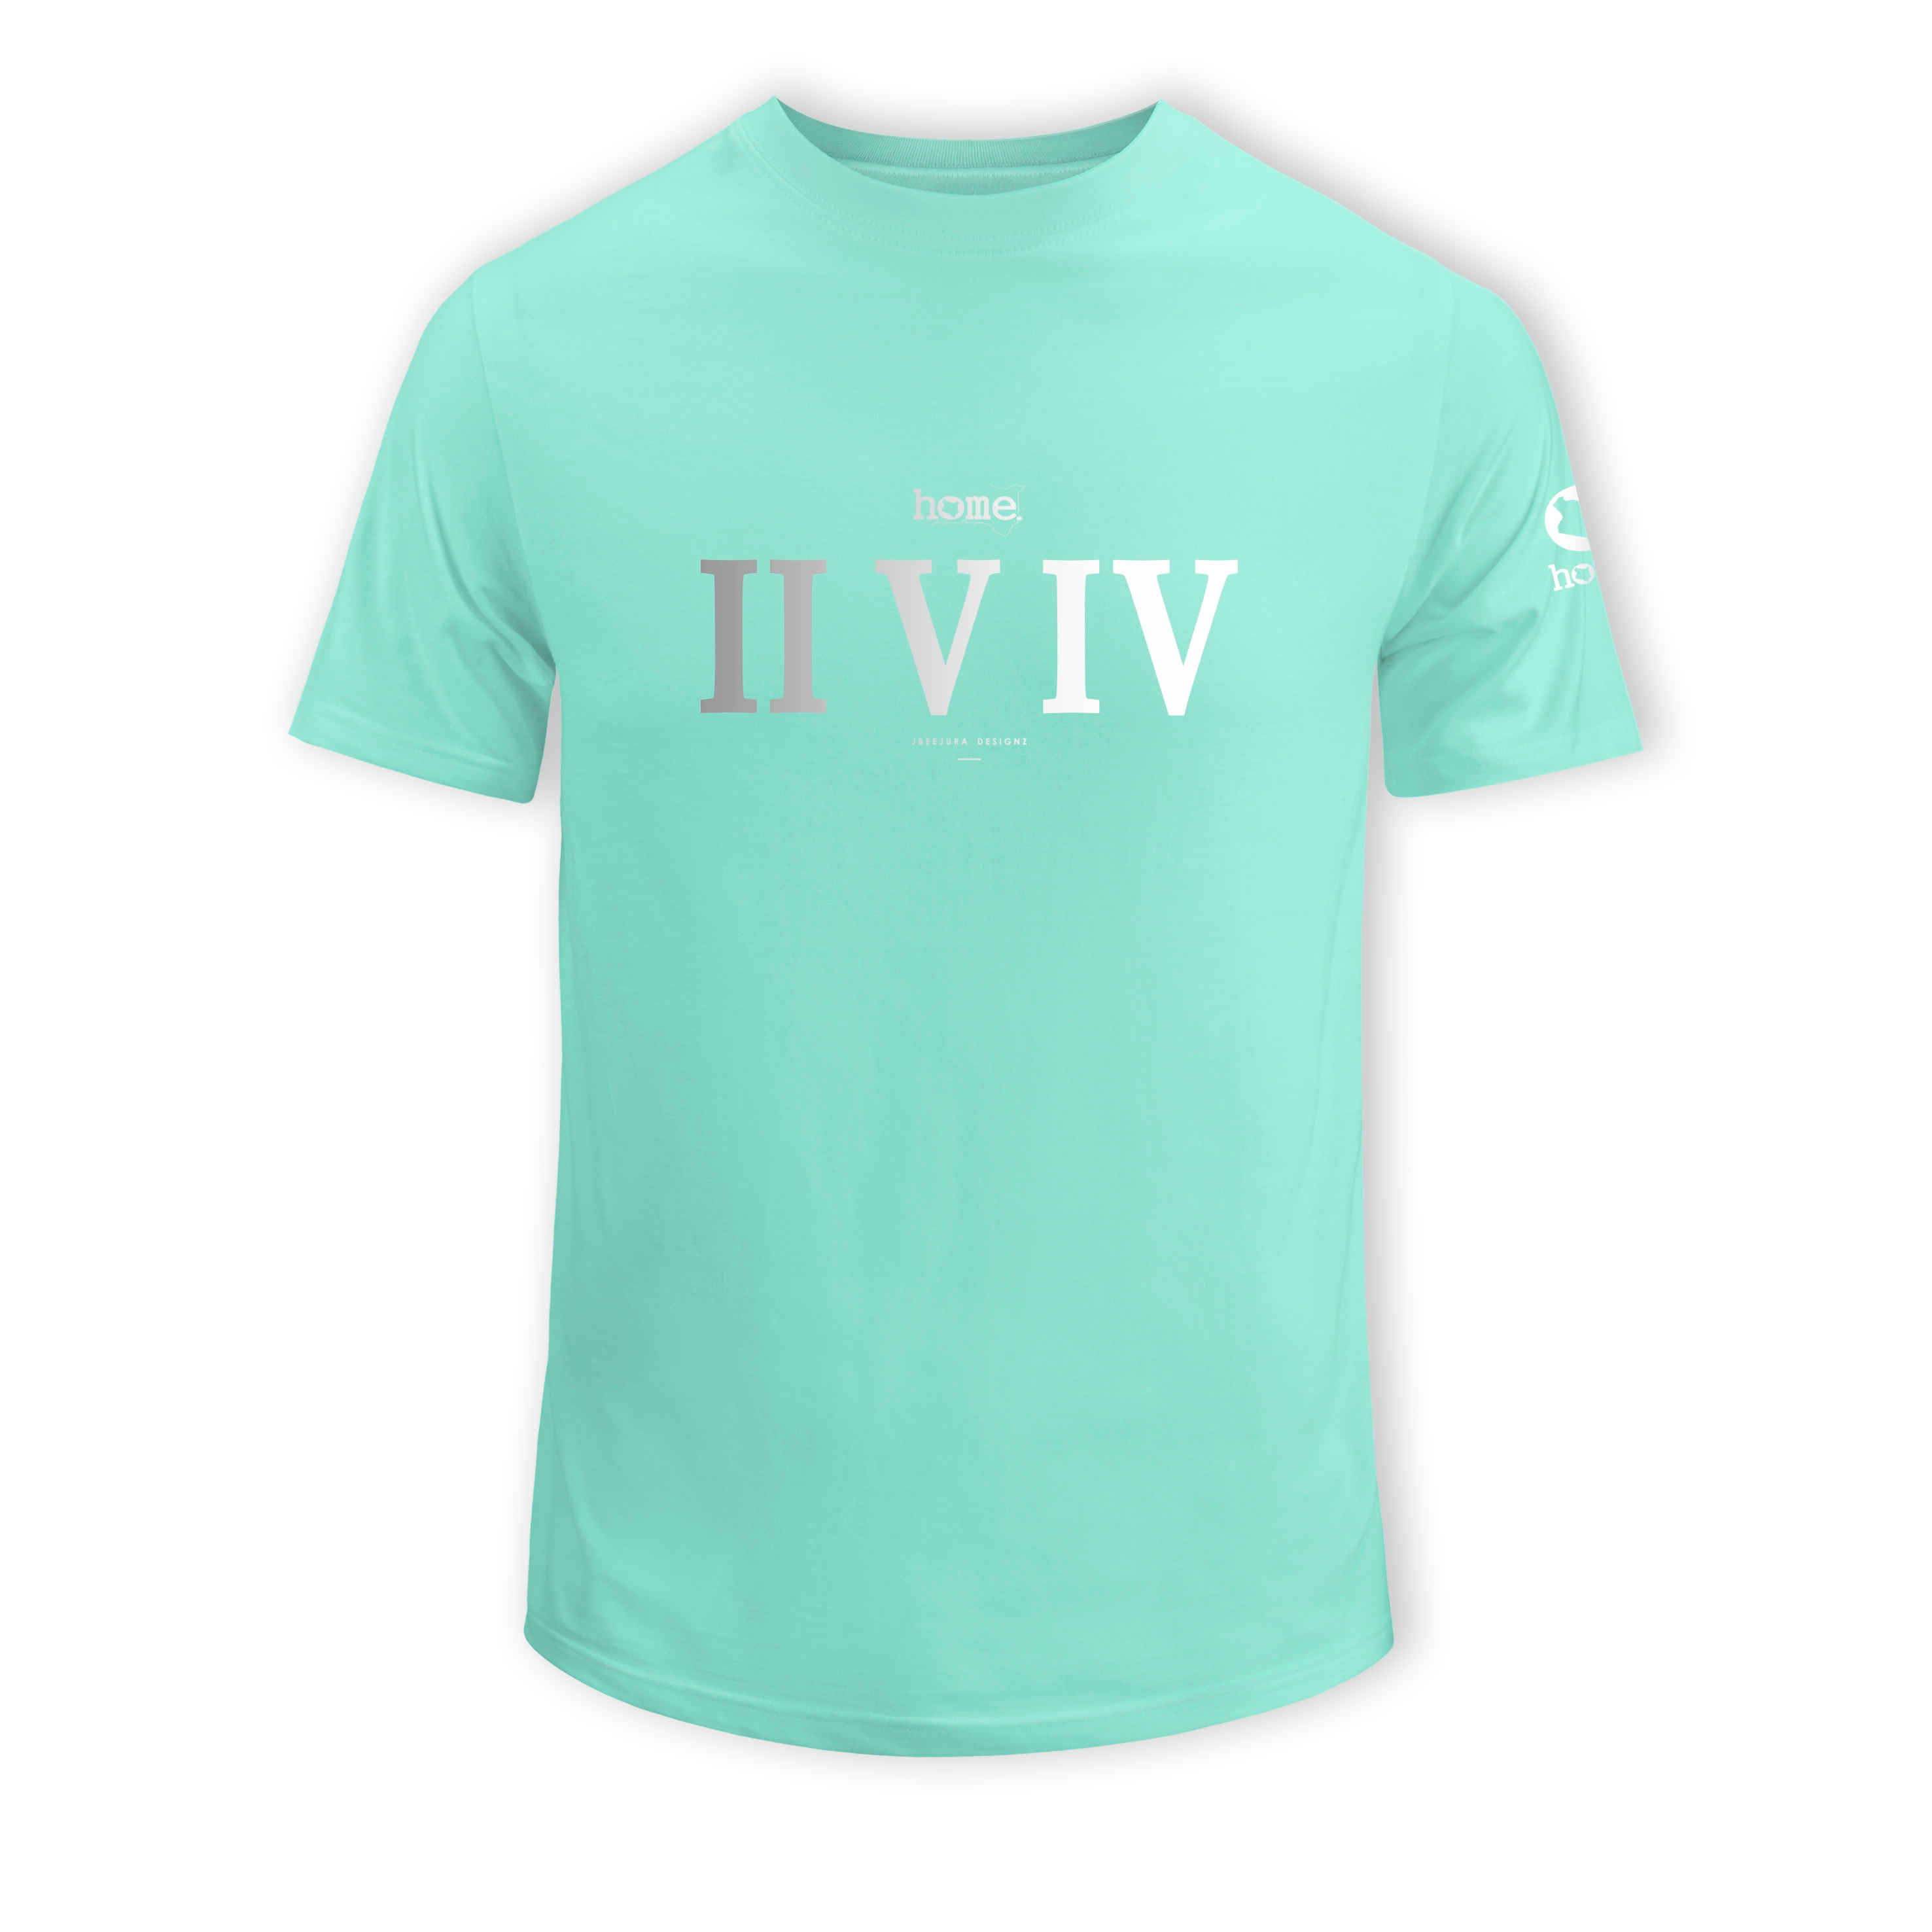 home_254 KIDS SHORT-SLEEVED TURQUOISE GREEN T-SHIRT WITH A SILVER ROMAN NUMERALS PRINT – COTTON PLUS FABRIC